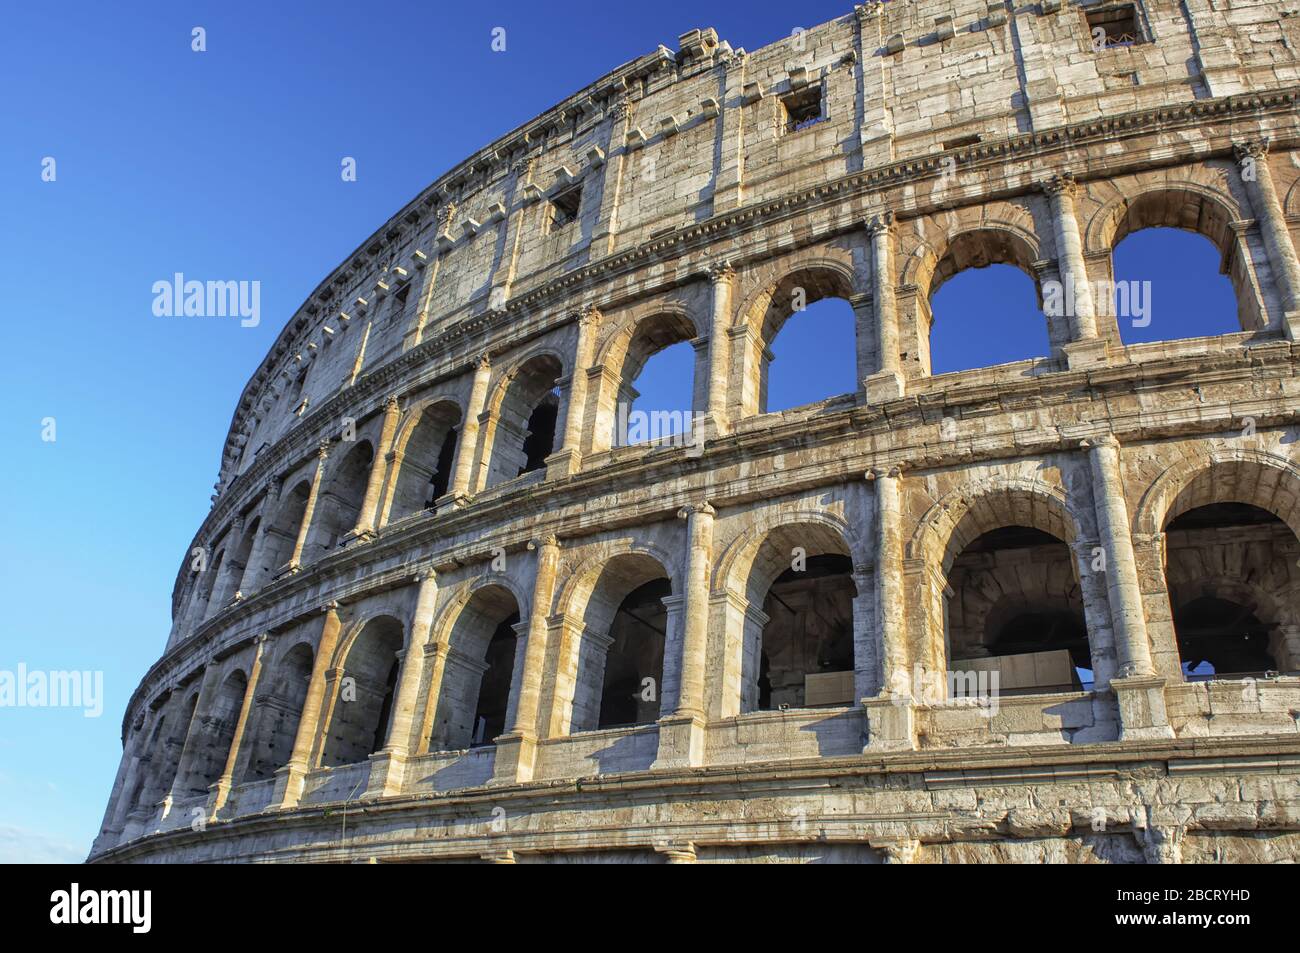 Colosseum at blue sky in Rome, Italy, Europe. Rome ancient arena for gladiator fights. Stock Photo